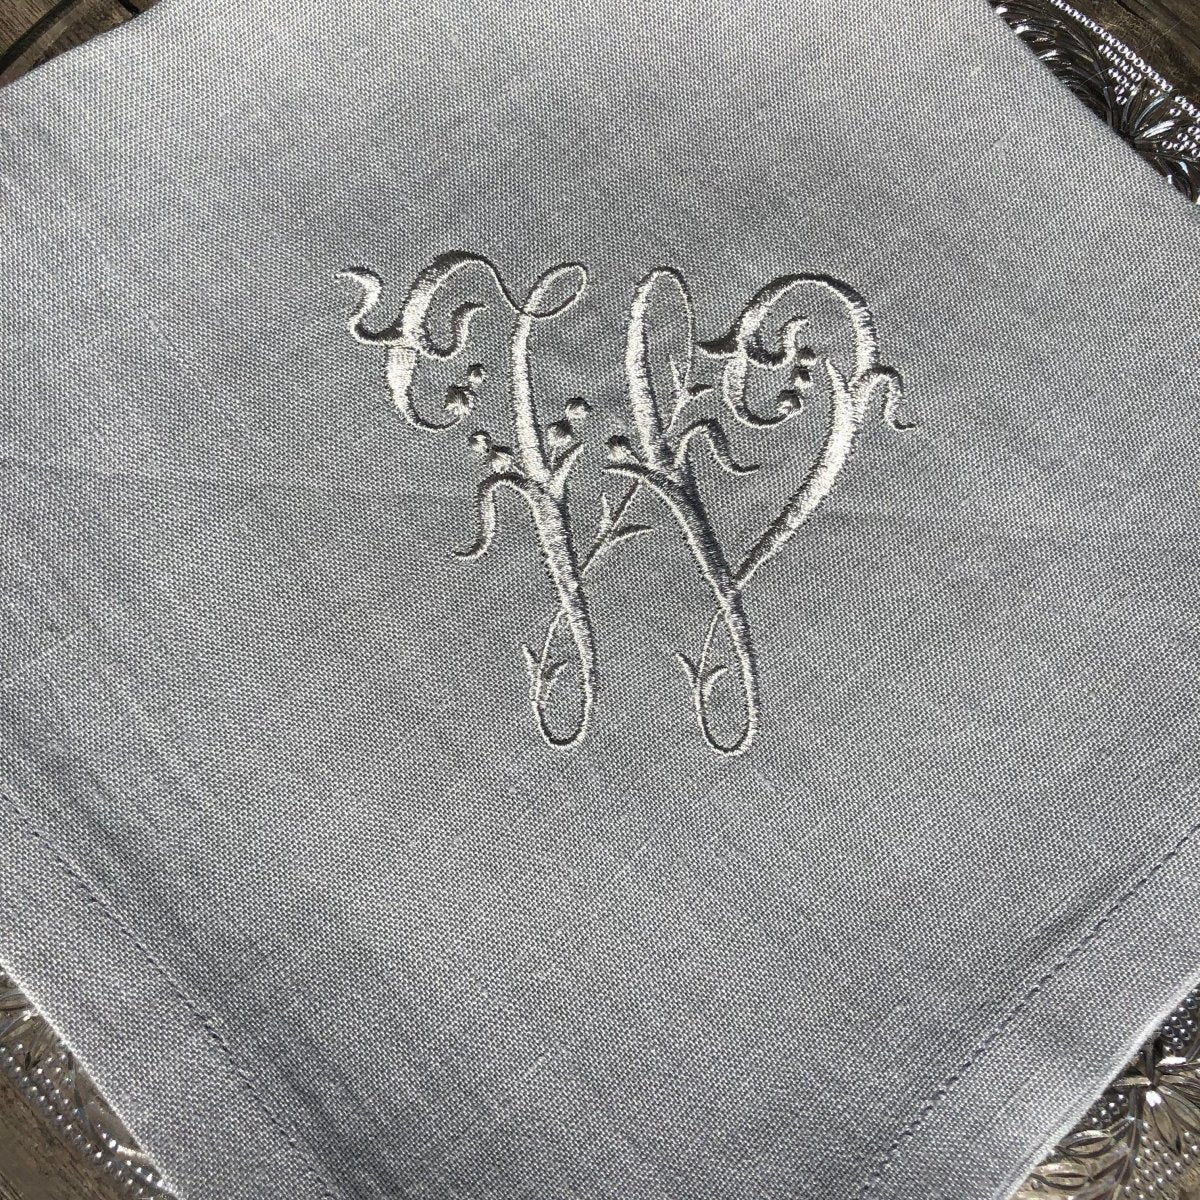 100% Neutral Linen Napkins with silky French Embroidered Monogram - Linen and Letters